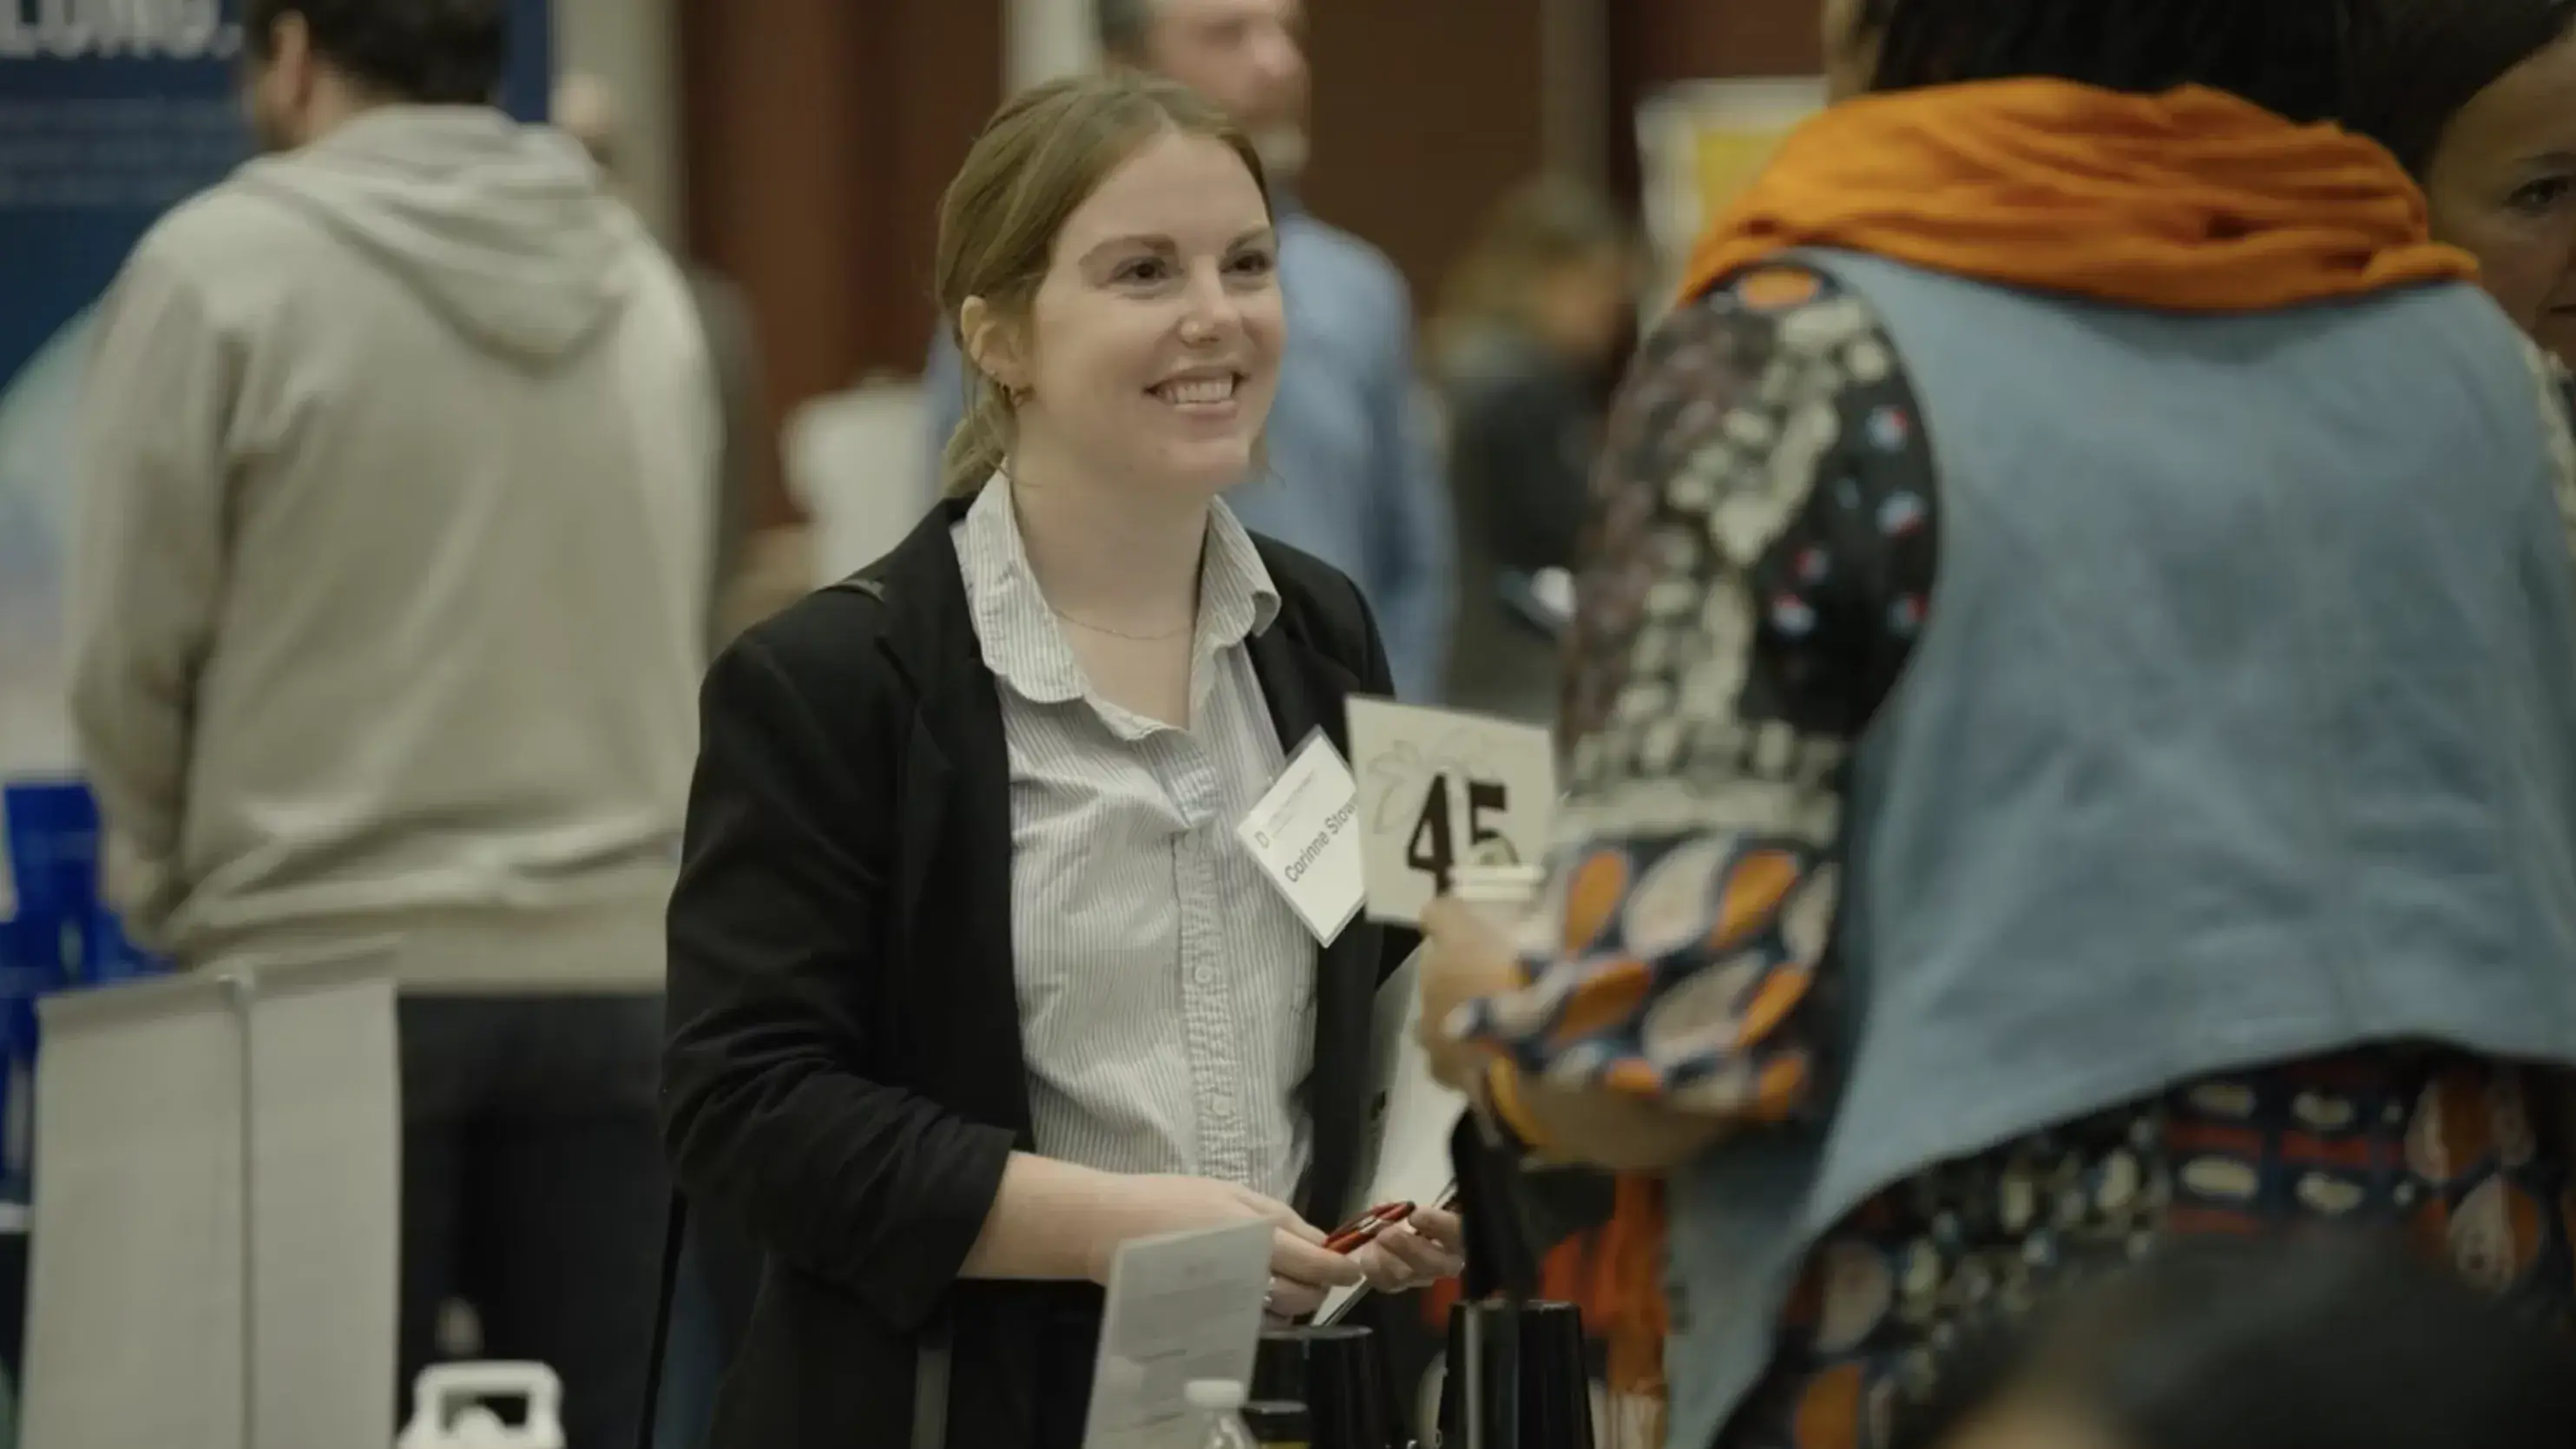 smiling woman greeting another person at a career fair